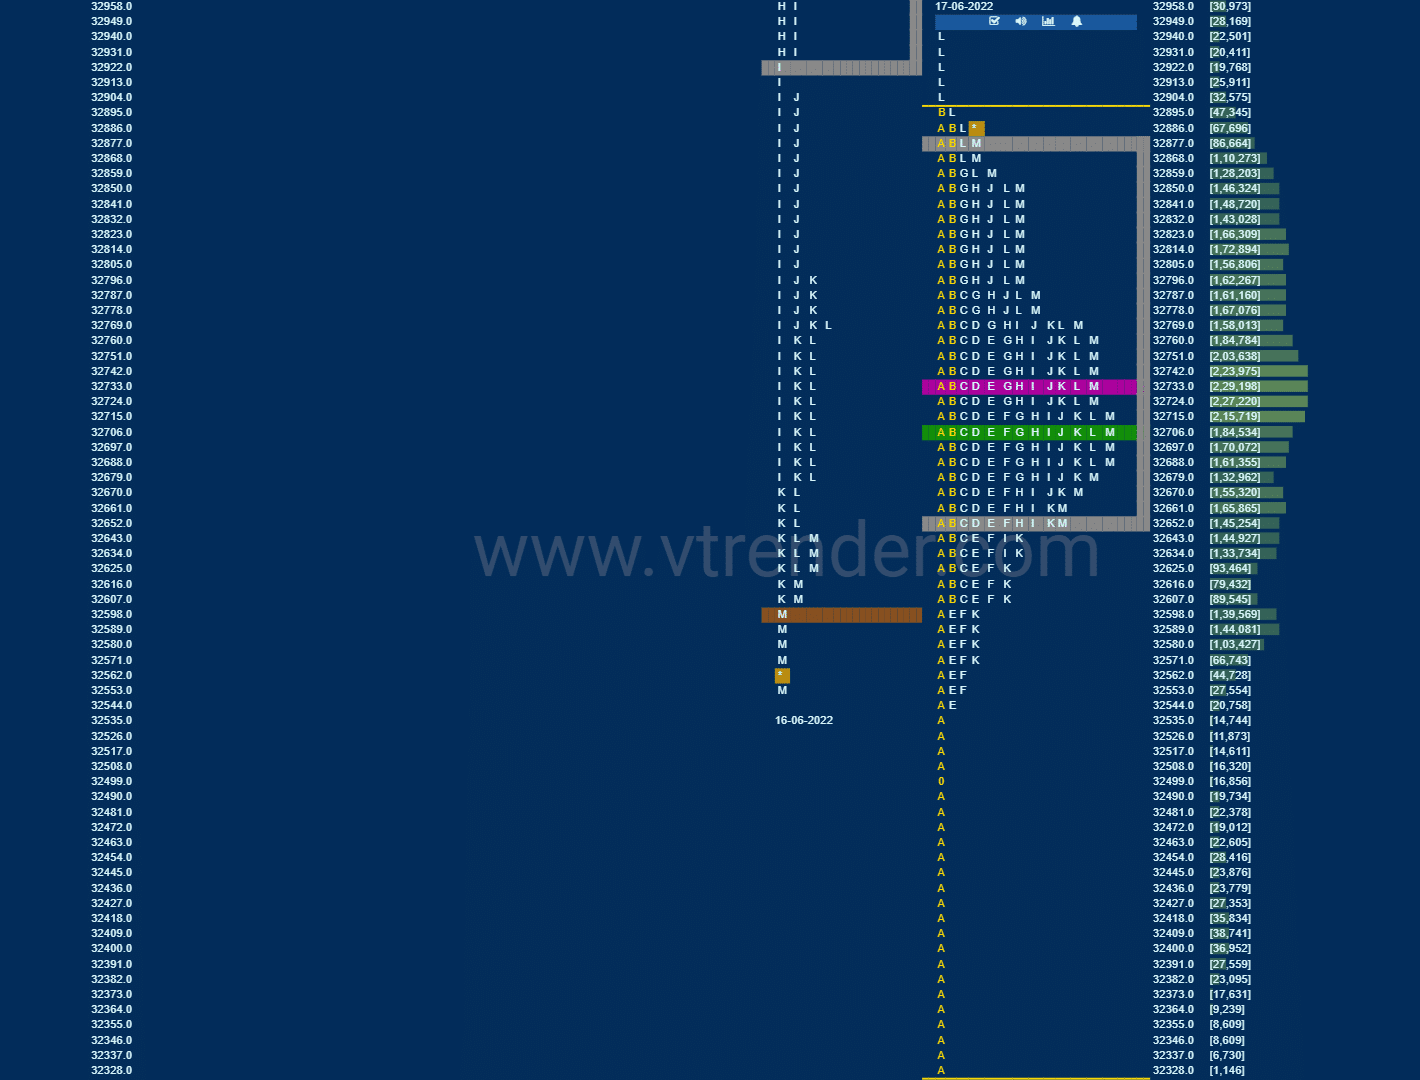 Bnf 13 Market Profile Analysis Dated 17Th Jun 2022 Banknifty Futures, Charts, Day Trading, Intraday Trading, Intraday Trading Strategies, Market Profile, Market Profile Trading Strategies, Nifty Futures, Order Flow Analysis, Support And Resistance, Technical Analysis, Trading Strategies, Volume Profile Trading